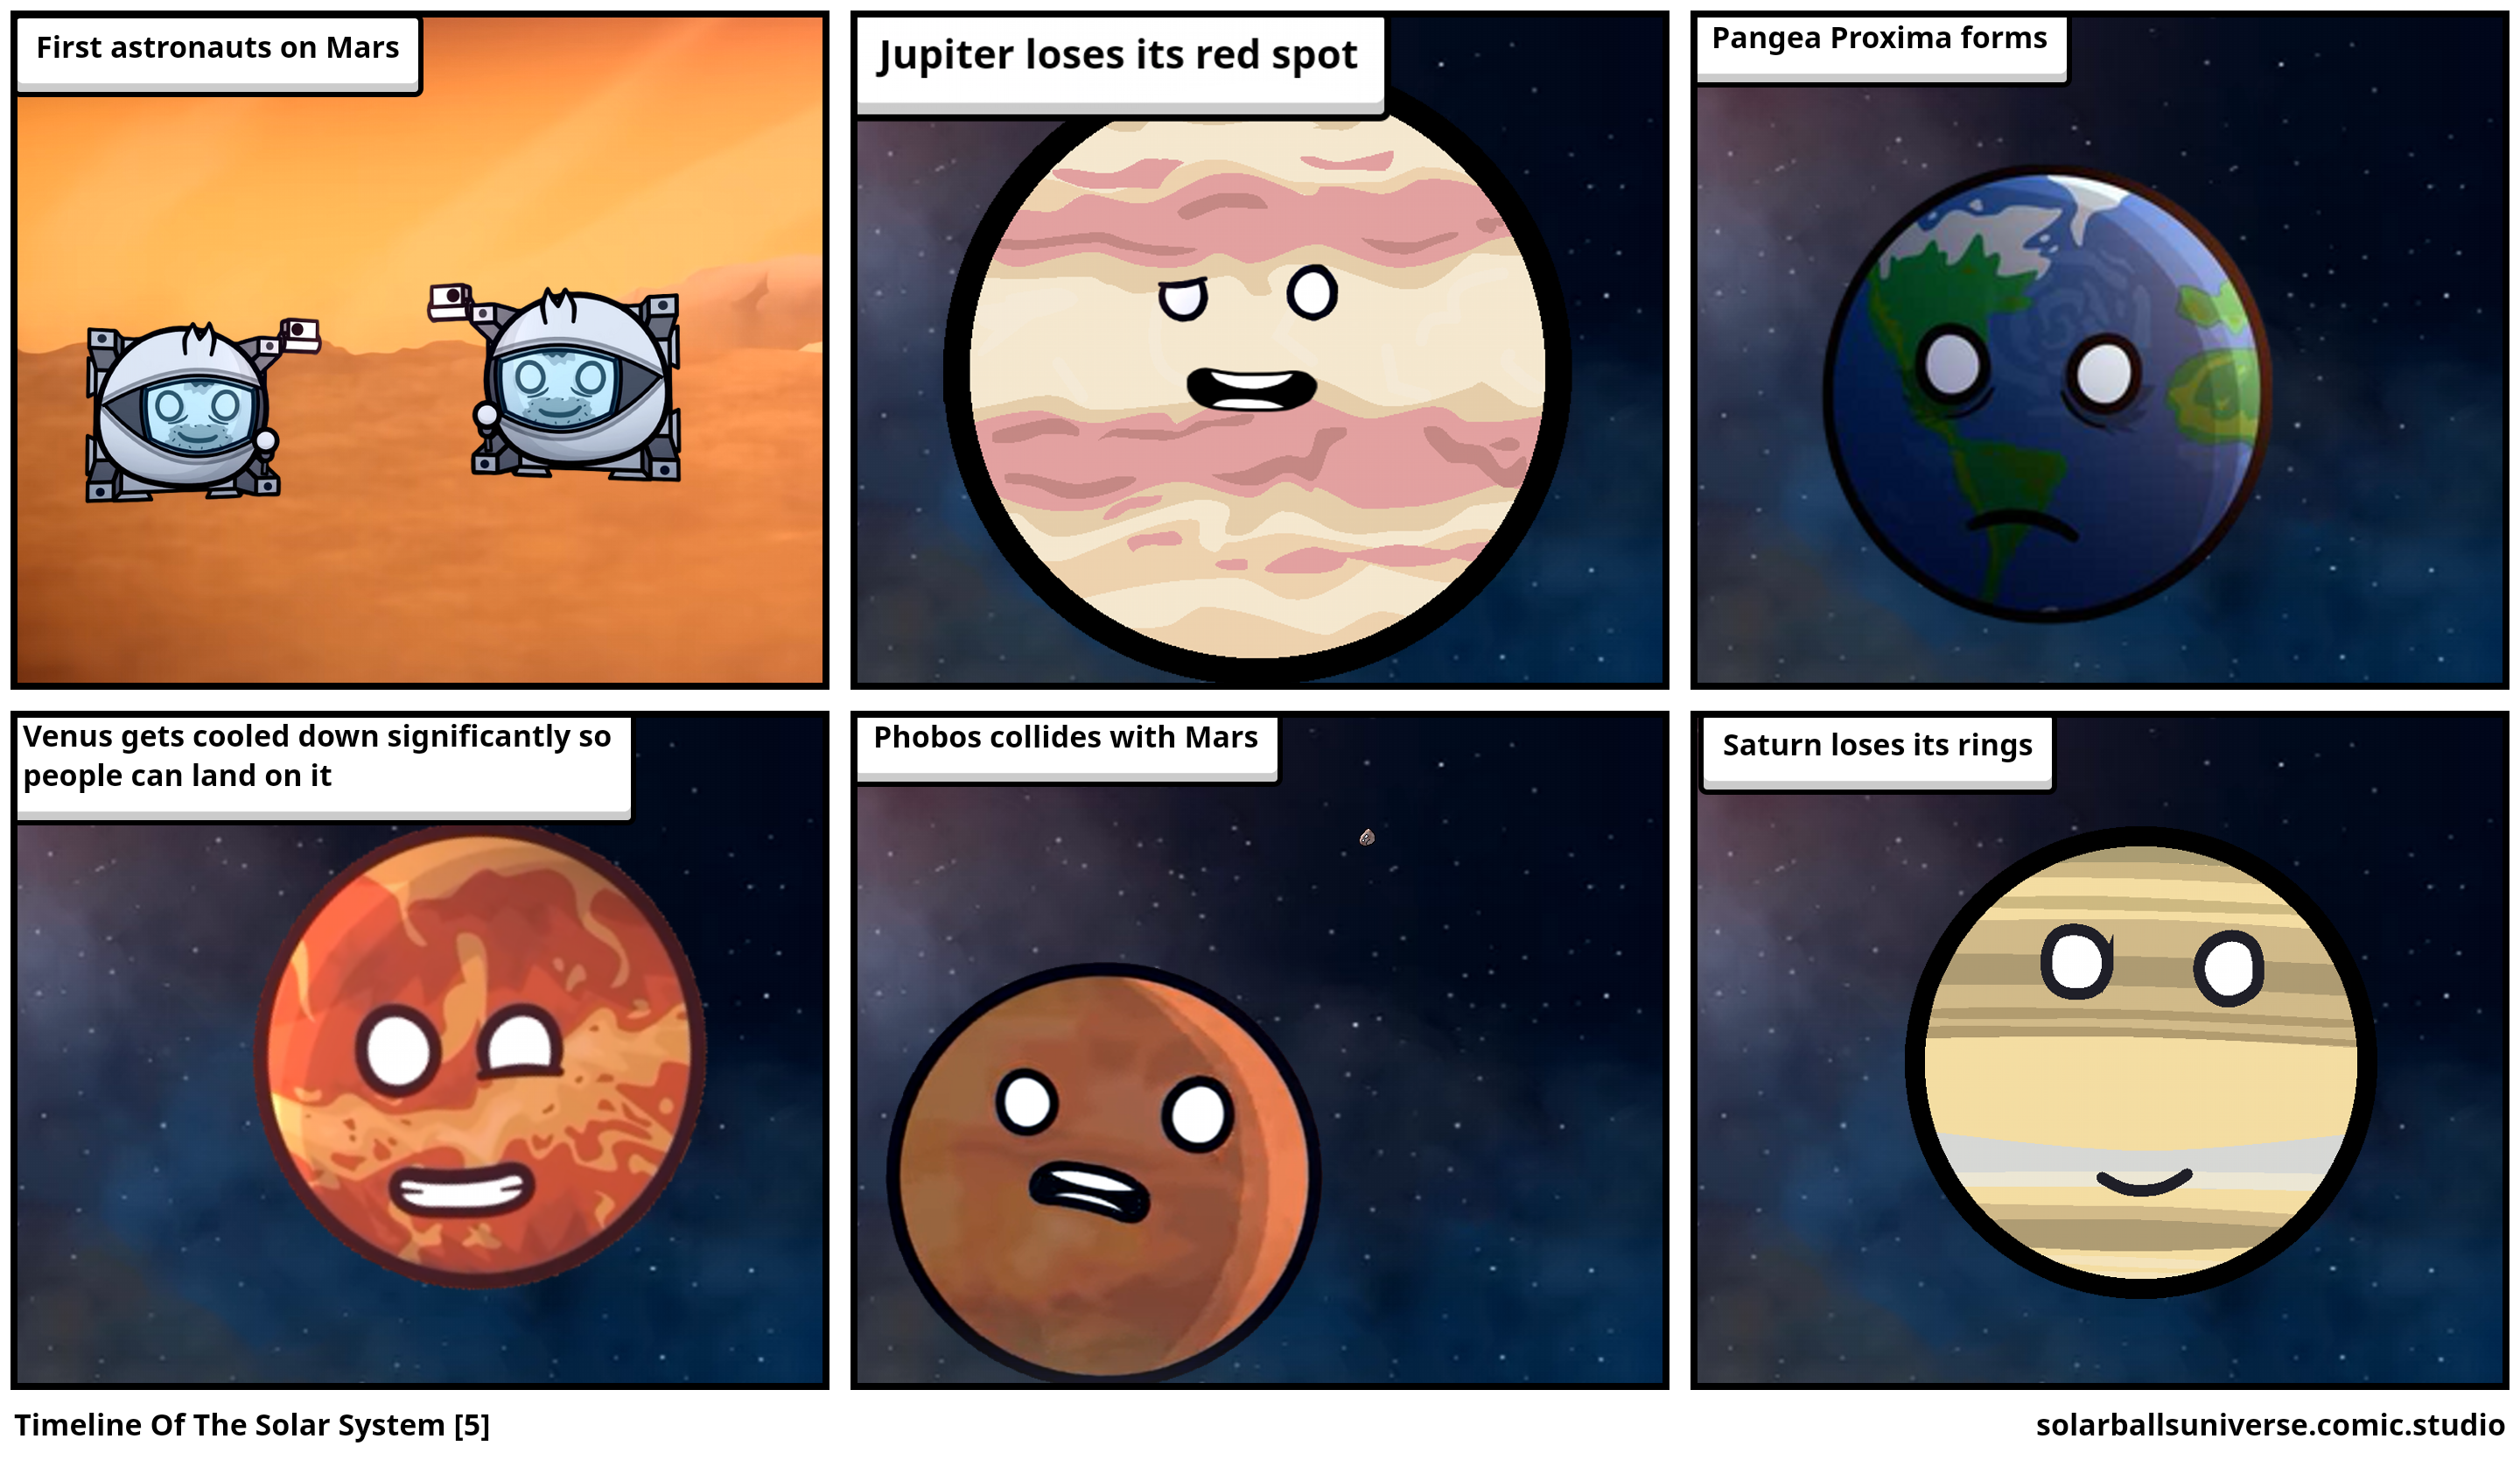 Timeline Of The Solar System [5]